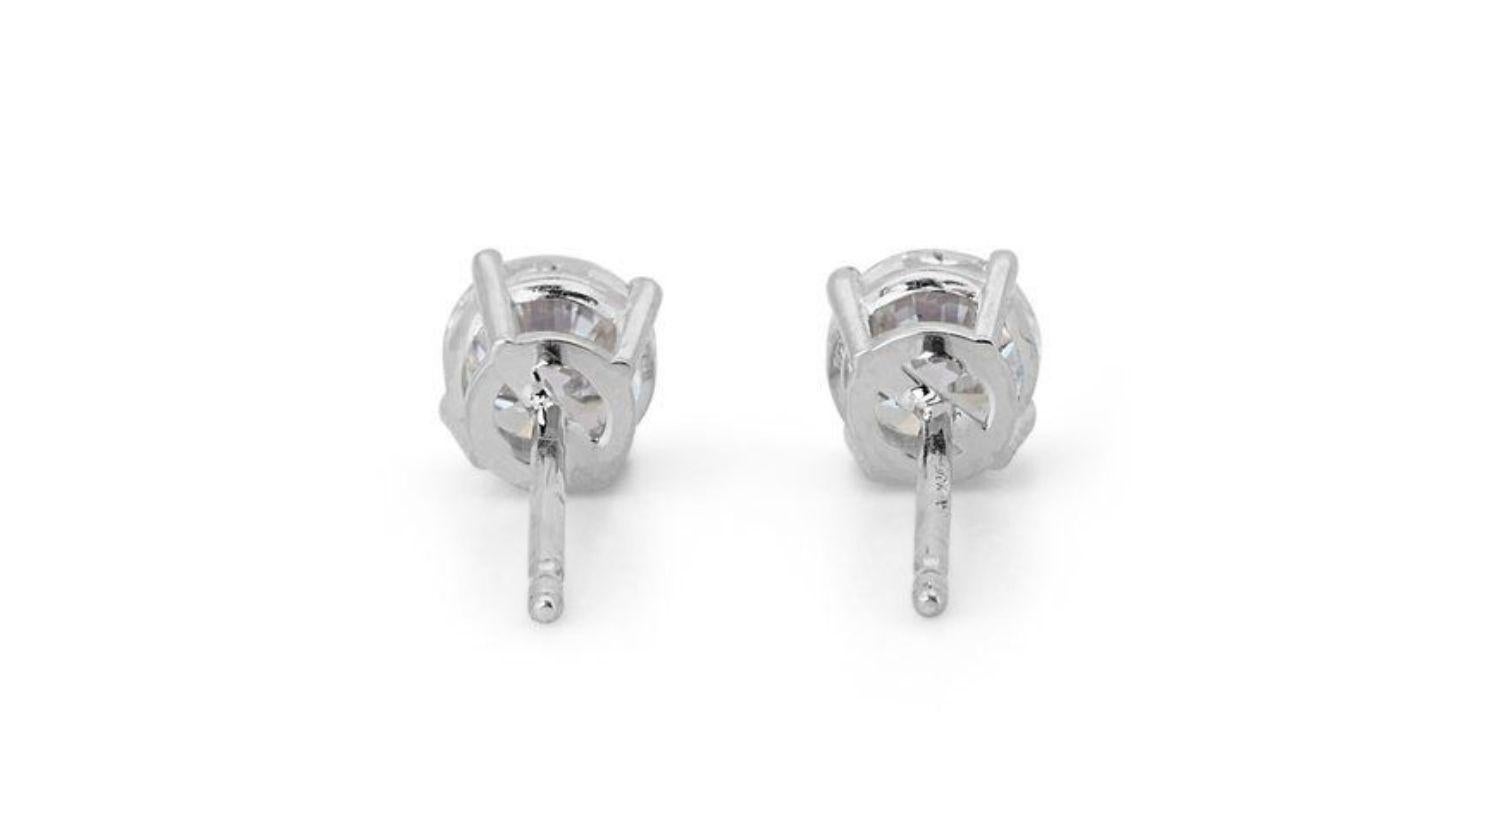 Dazzling 1.41ct Round Brilliant Diamond Stud Earrings For Sale 1